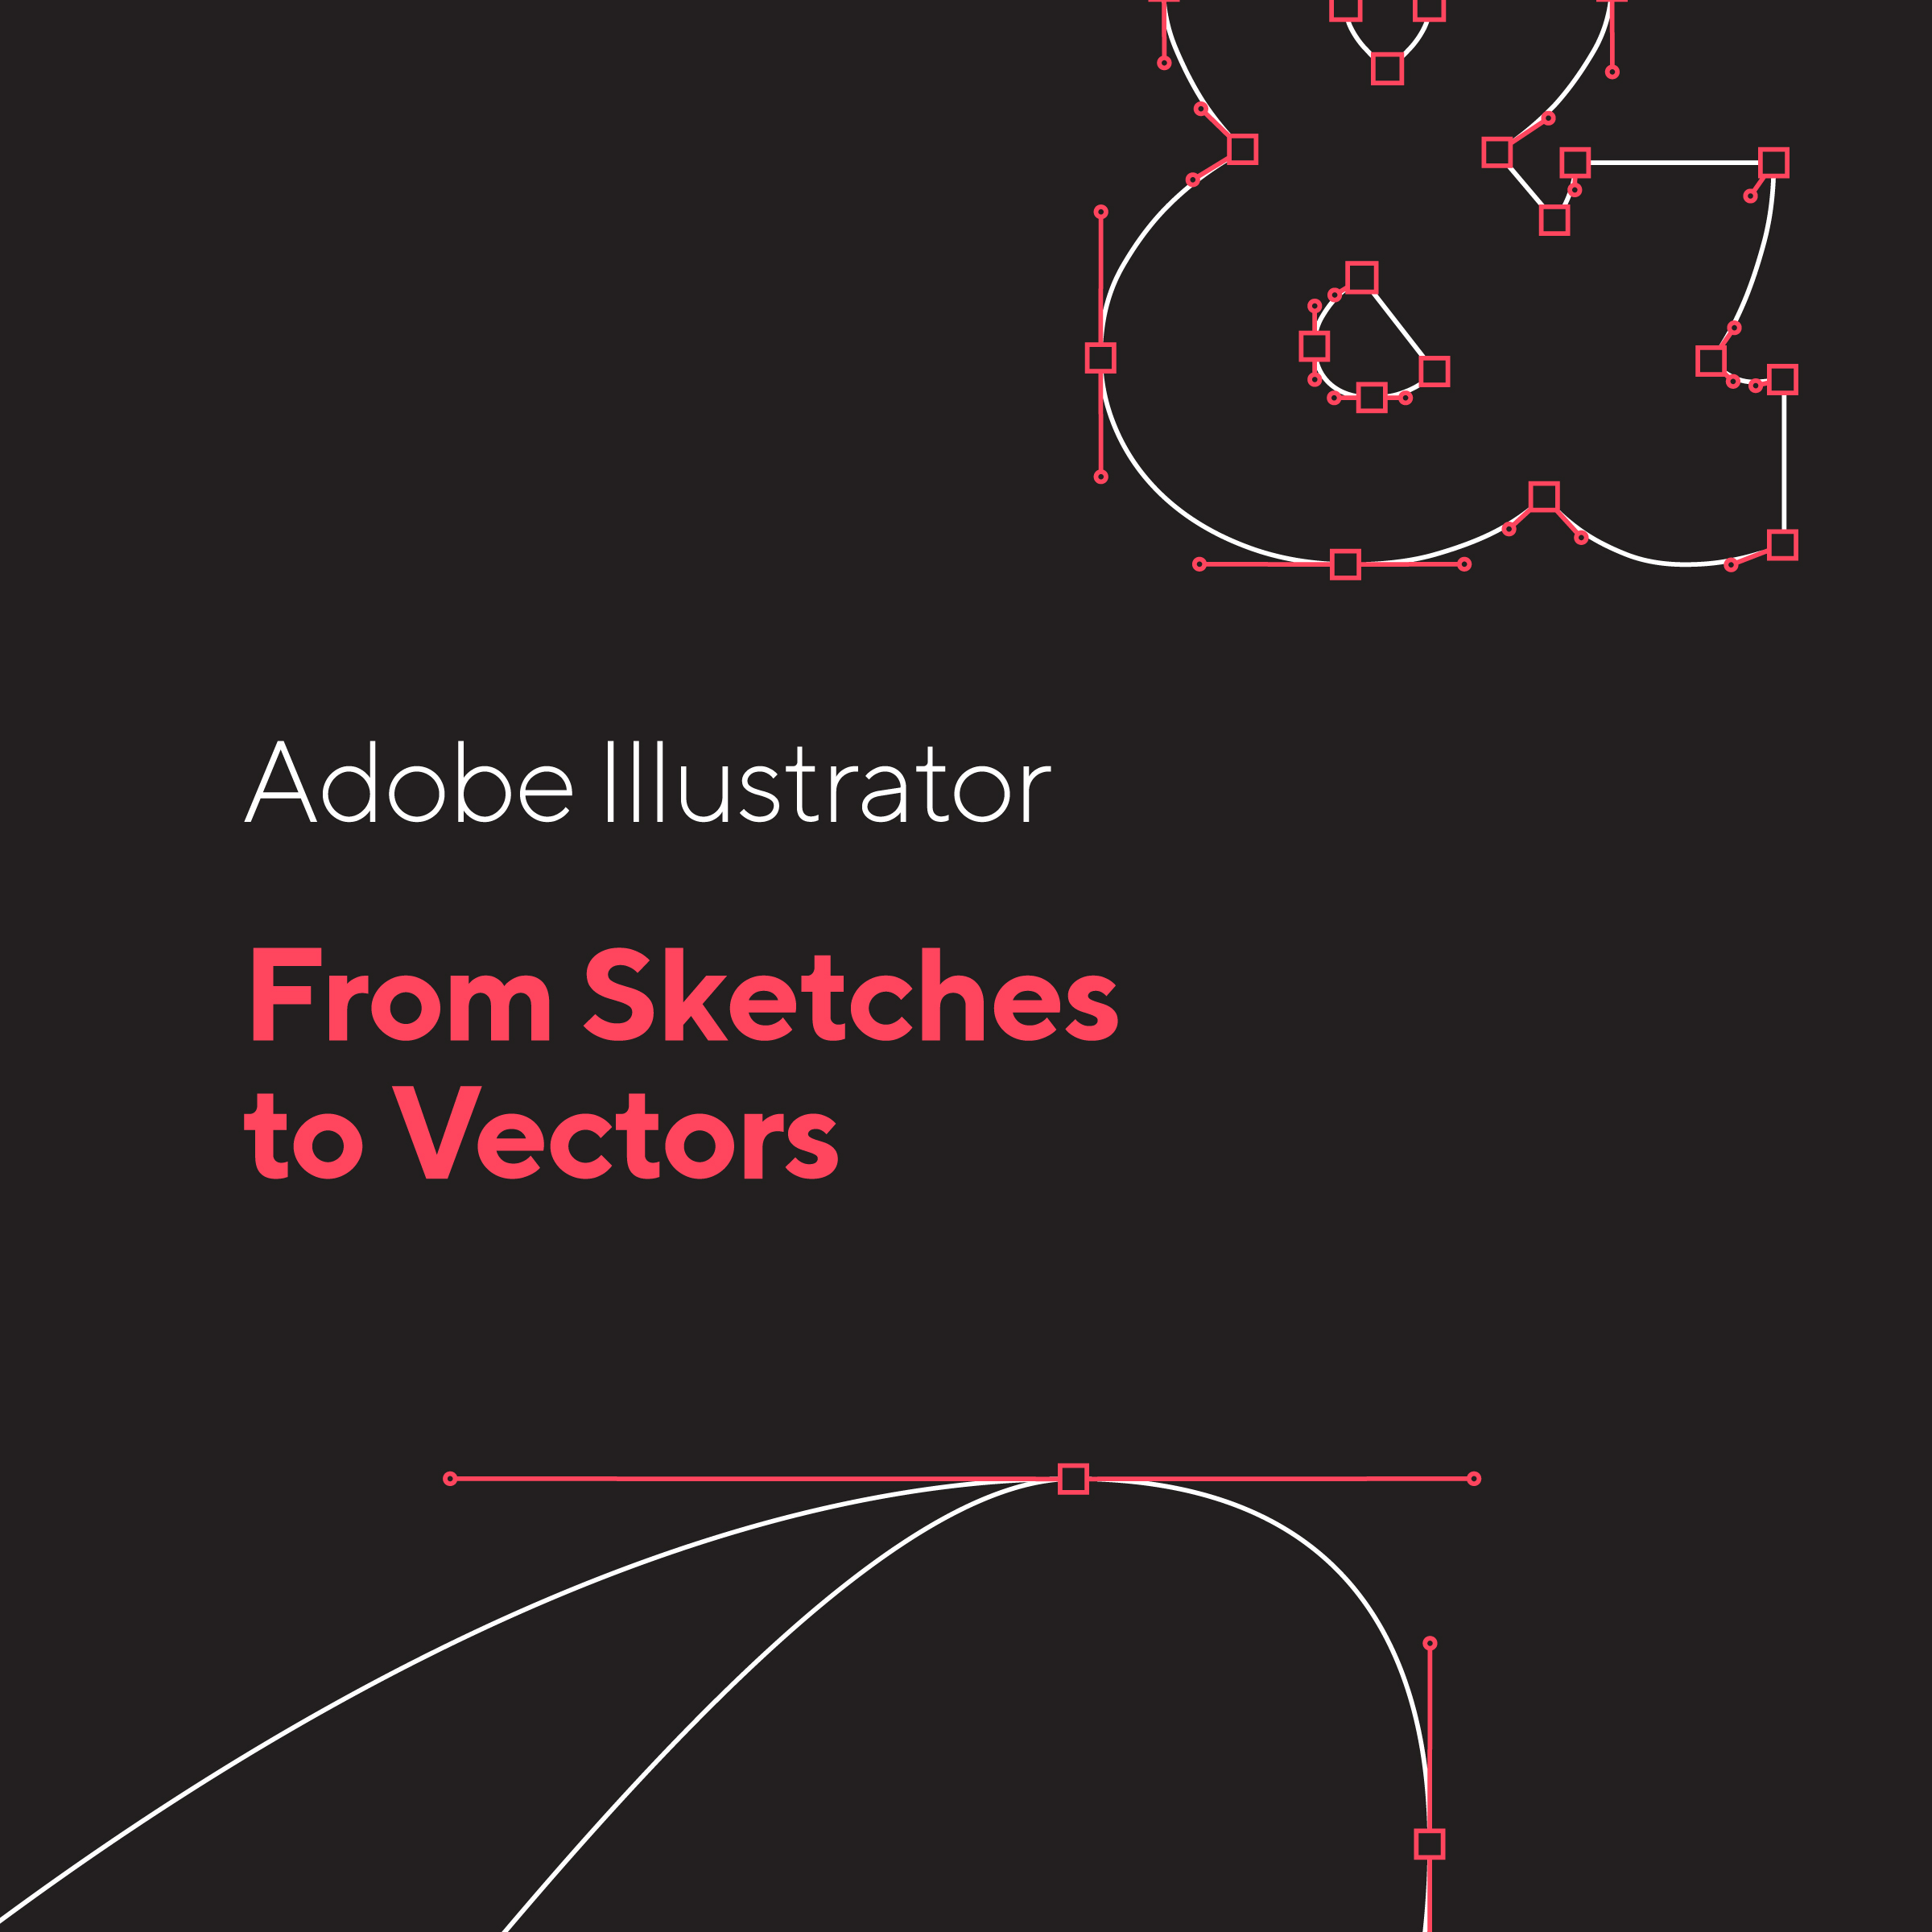 From Sketches to Vectors